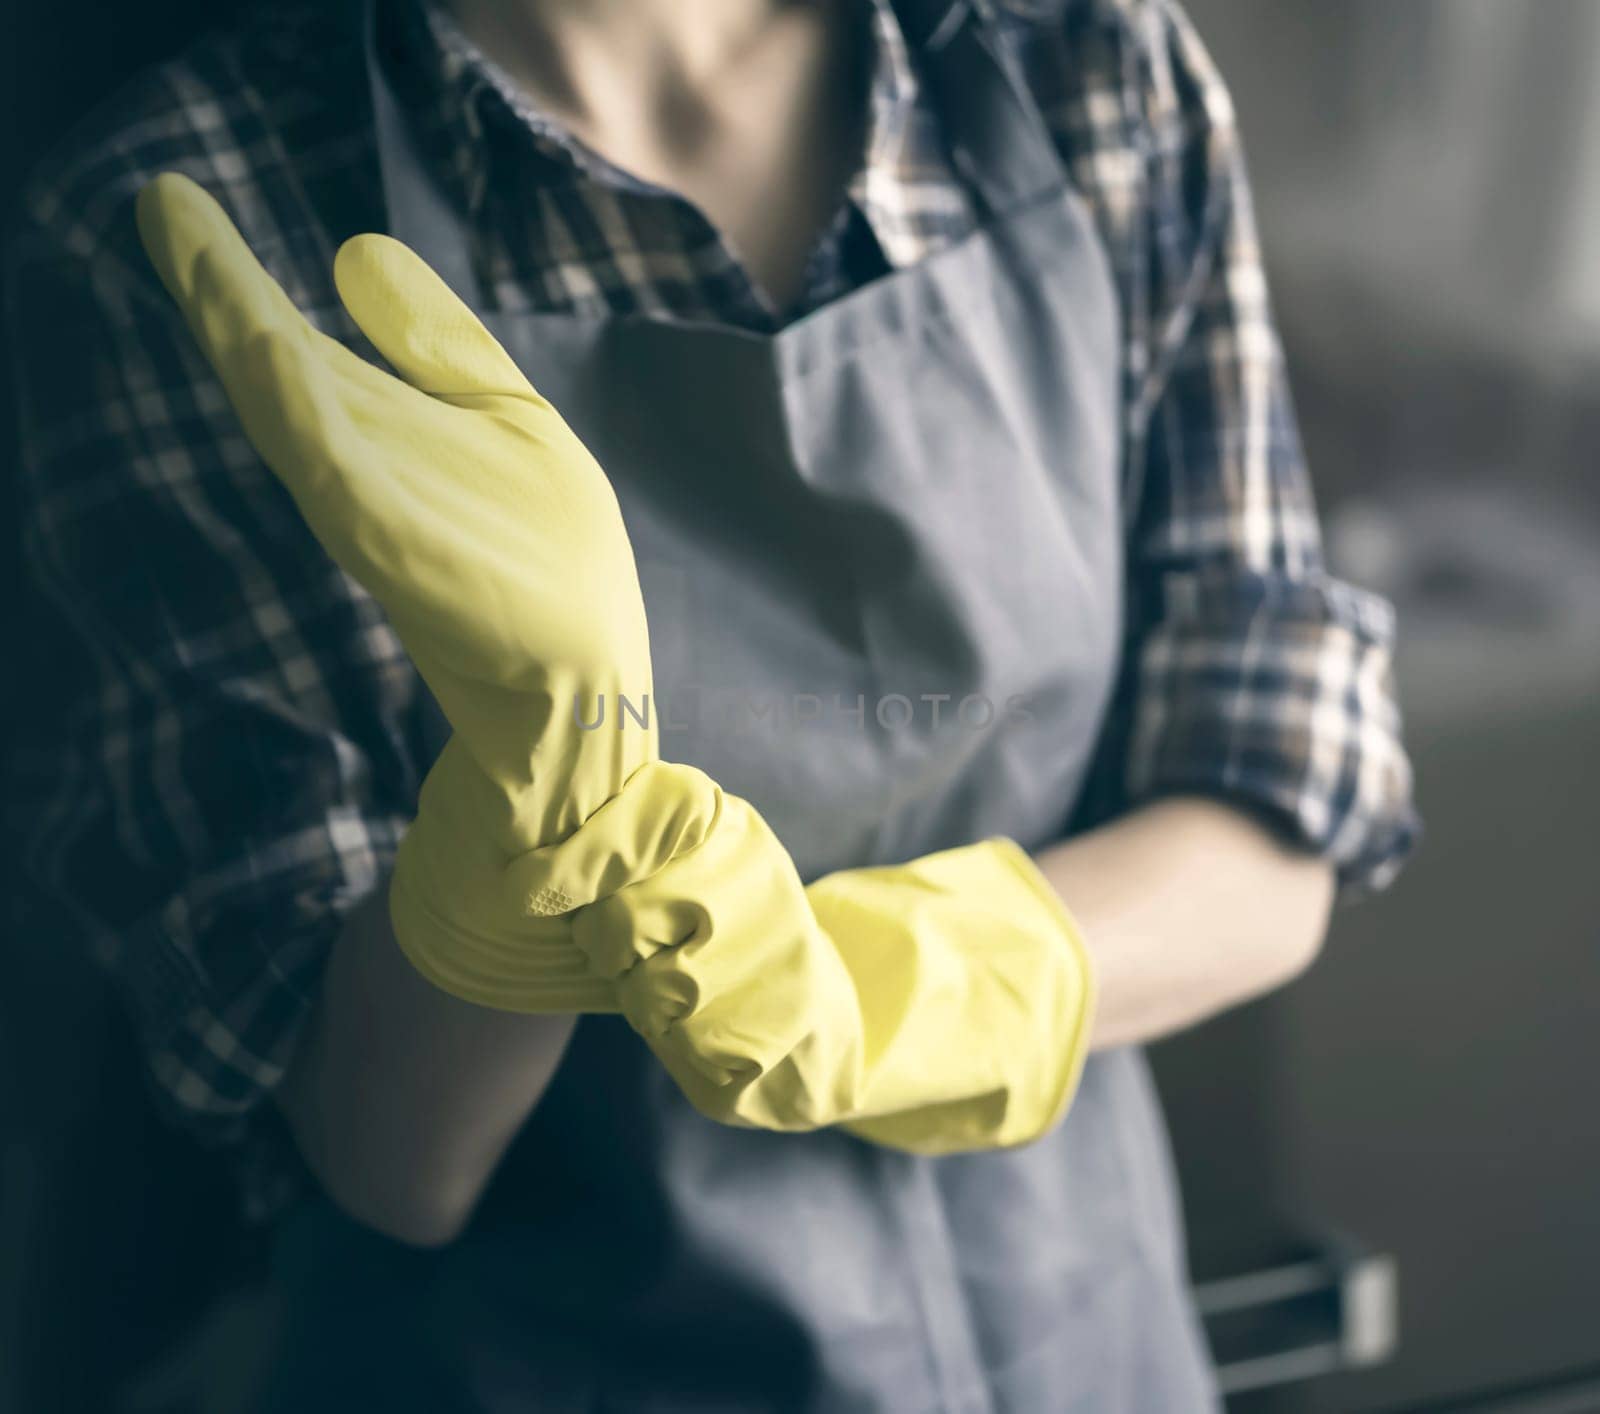 A young girl in a plaid shirt and apron puts yellow rubber gloves on her hands to start cleaning her house and create comfort. Housekeeper with gloves doing disinfection.